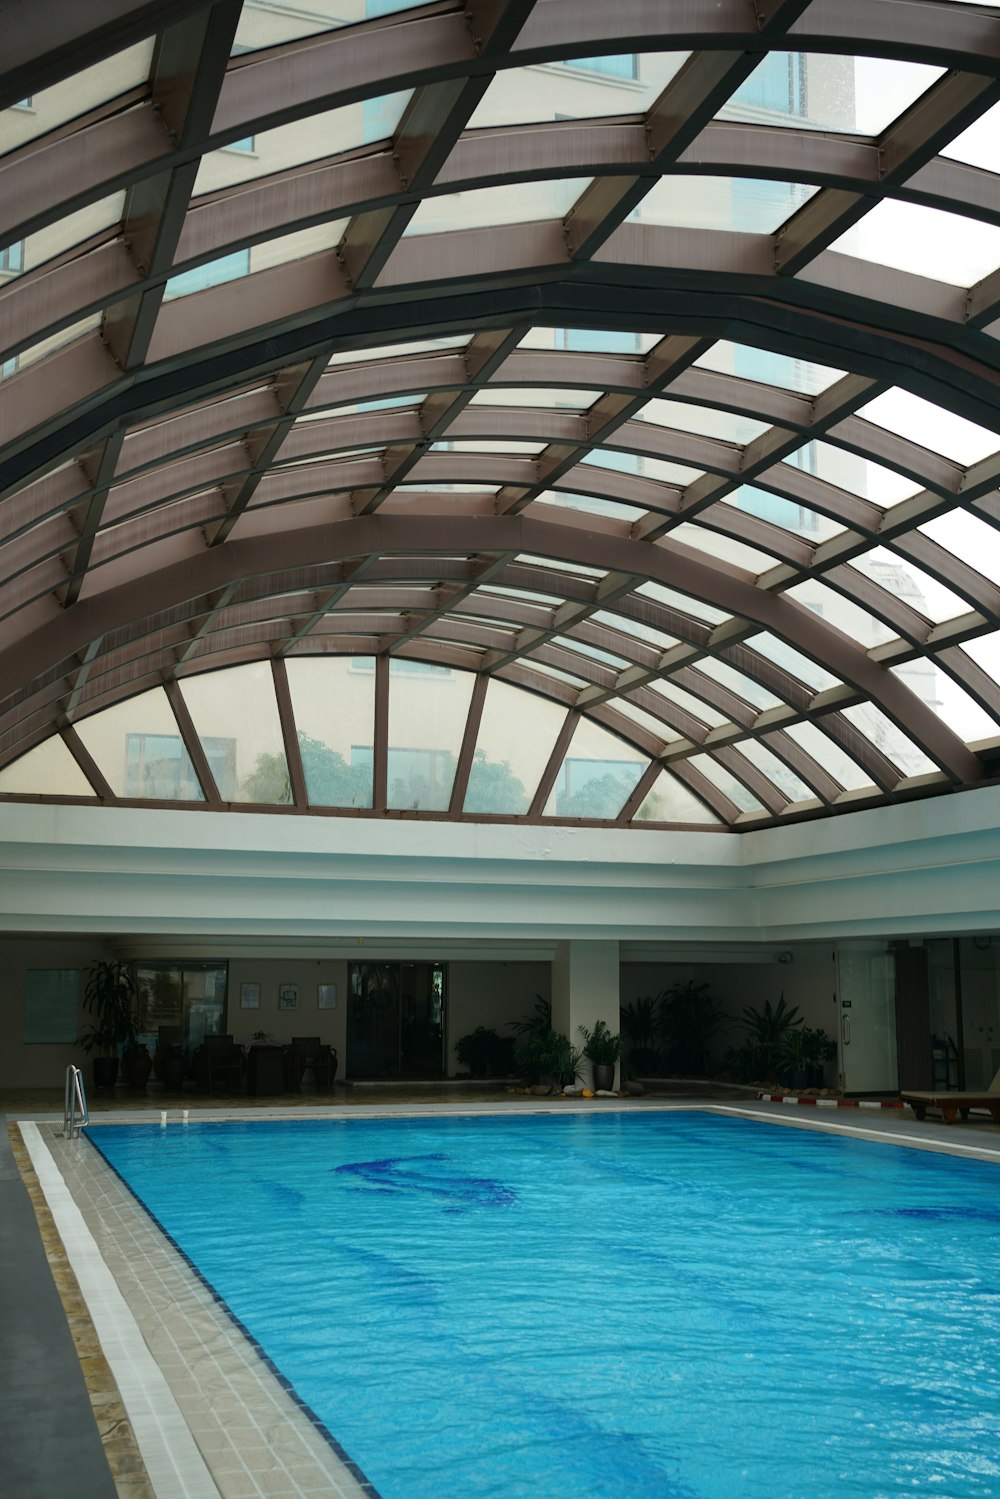 a large indoor swimming pool in a building